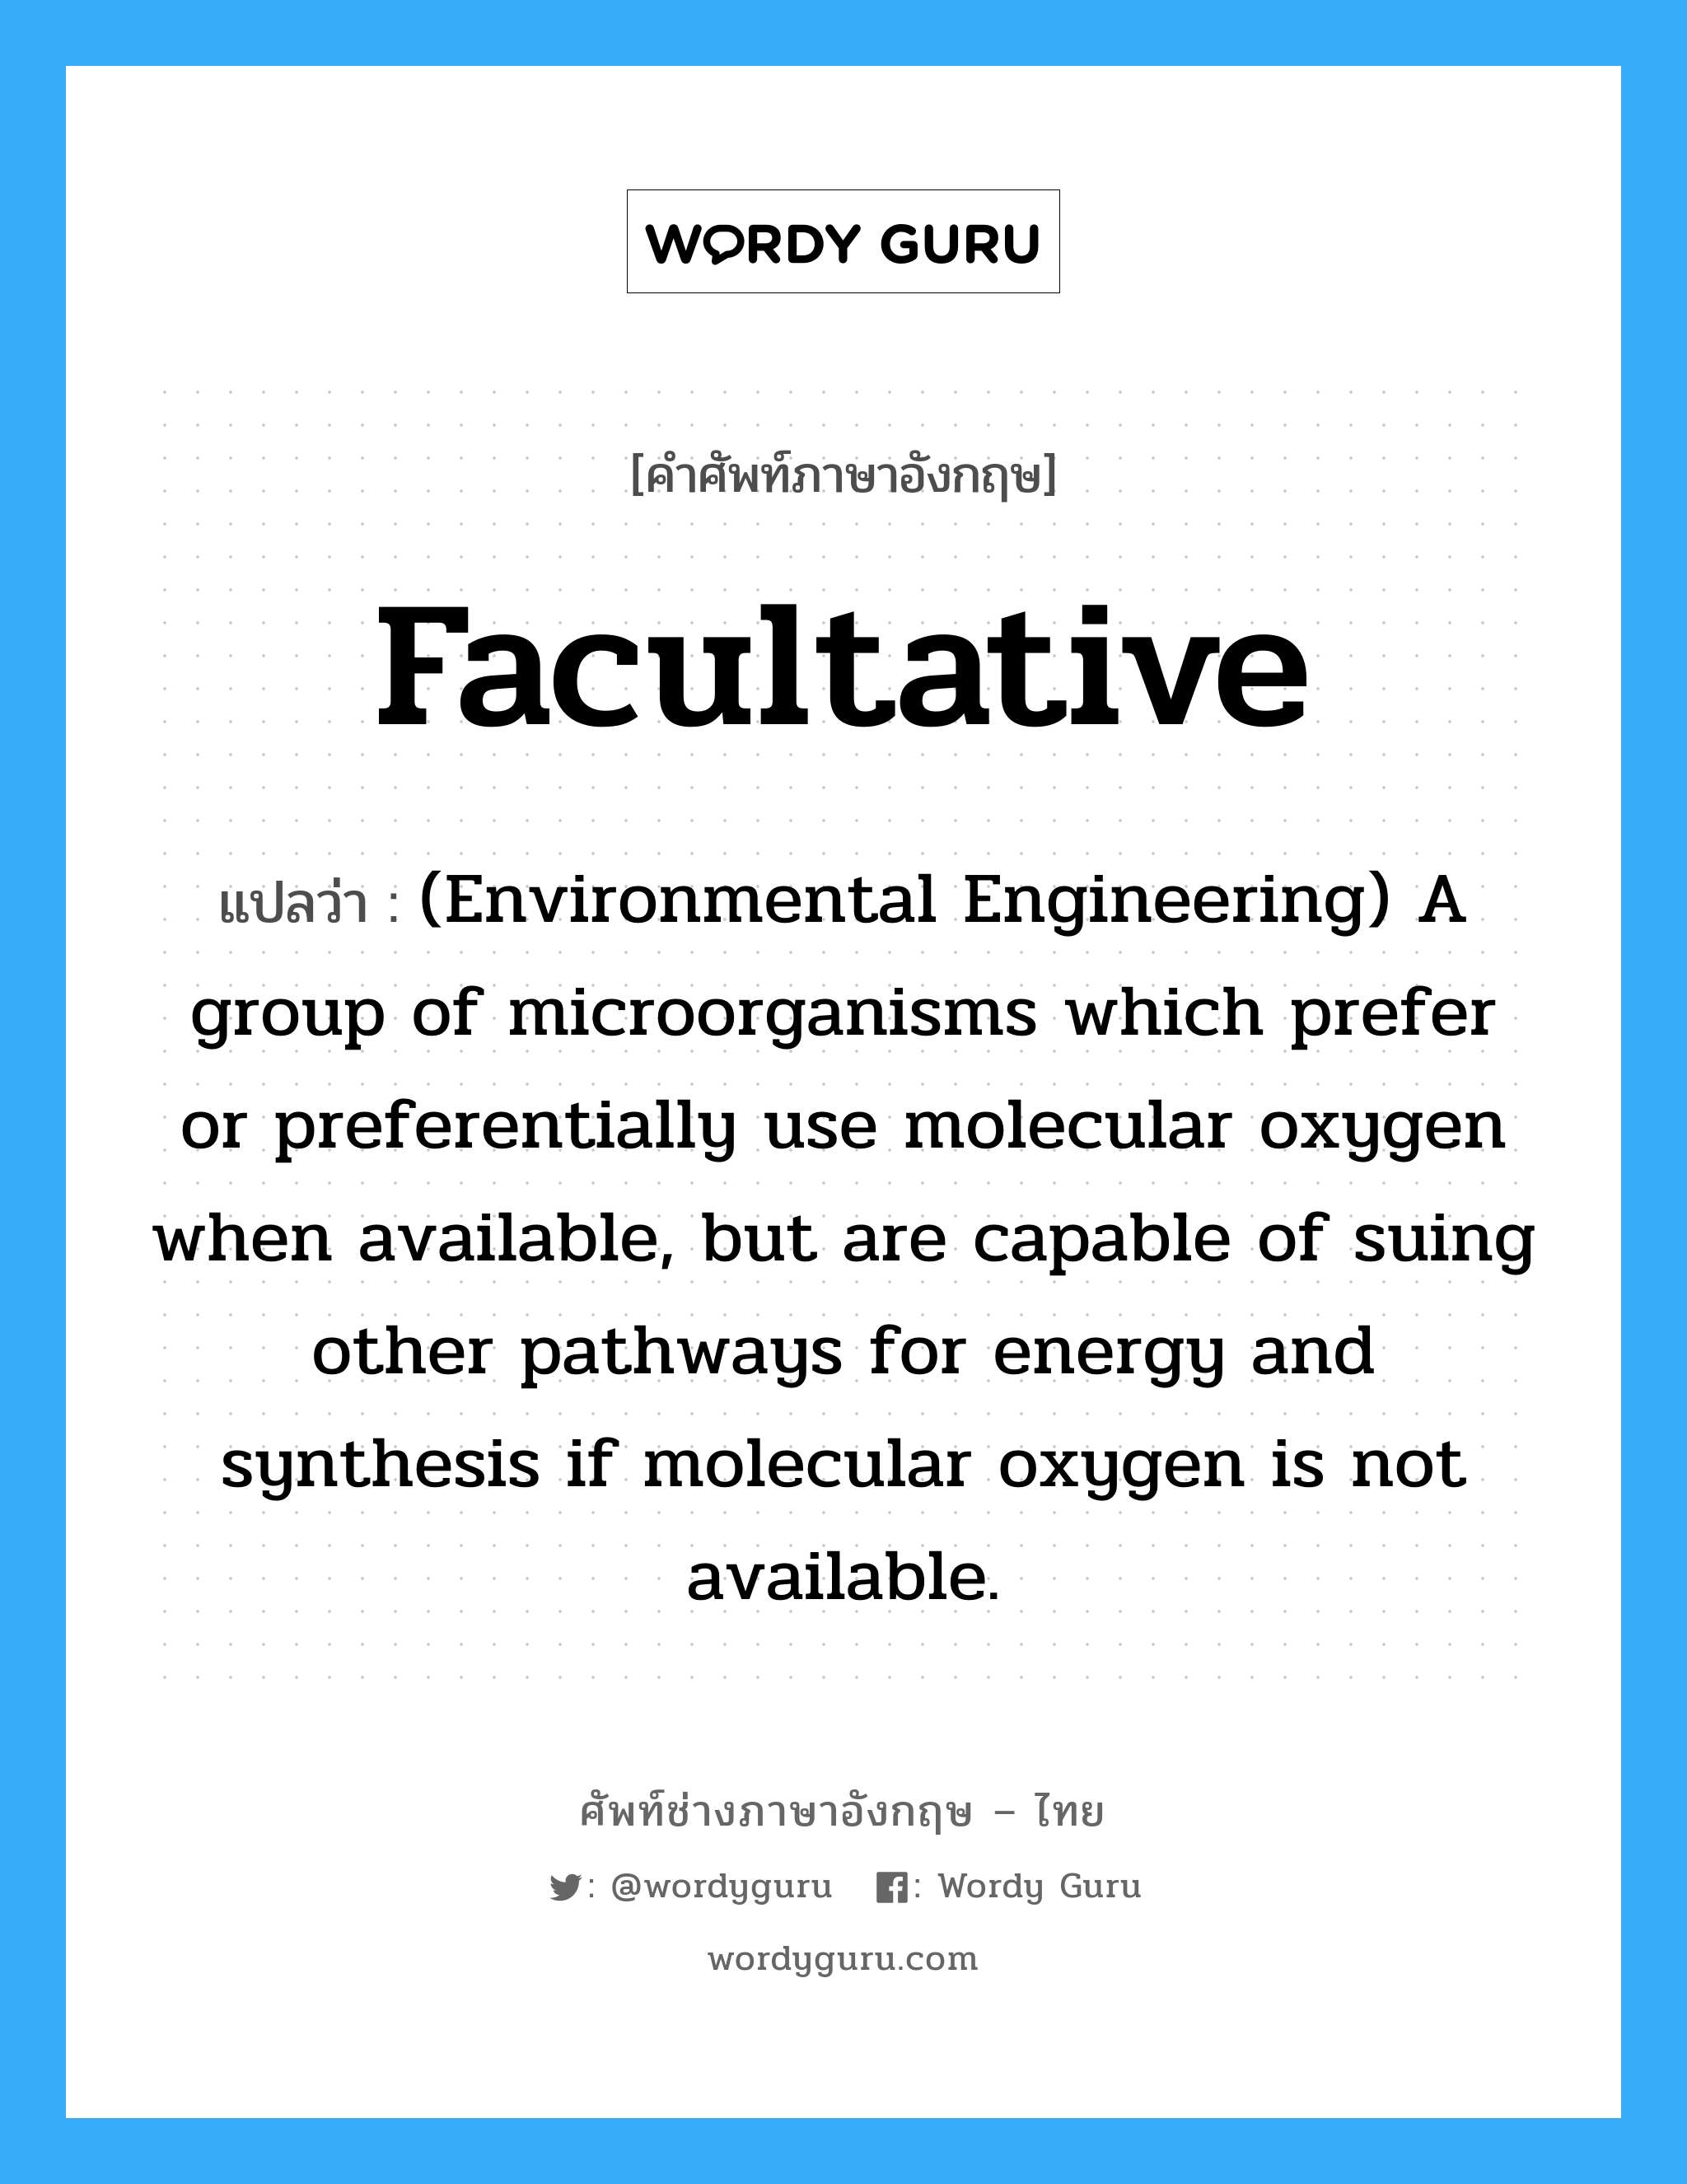 Facultative แปลว่า?, คำศัพท์ช่างภาษาอังกฤษ - ไทย Facultative คำศัพท์ภาษาอังกฤษ Facultative แปลว่า (Environmental Engineering) A group of microorganisms which prefer or preferentially use molecular oxygen when available, but are capable of suing other pathways for energy and synthesis if molecular oxygen is not available.